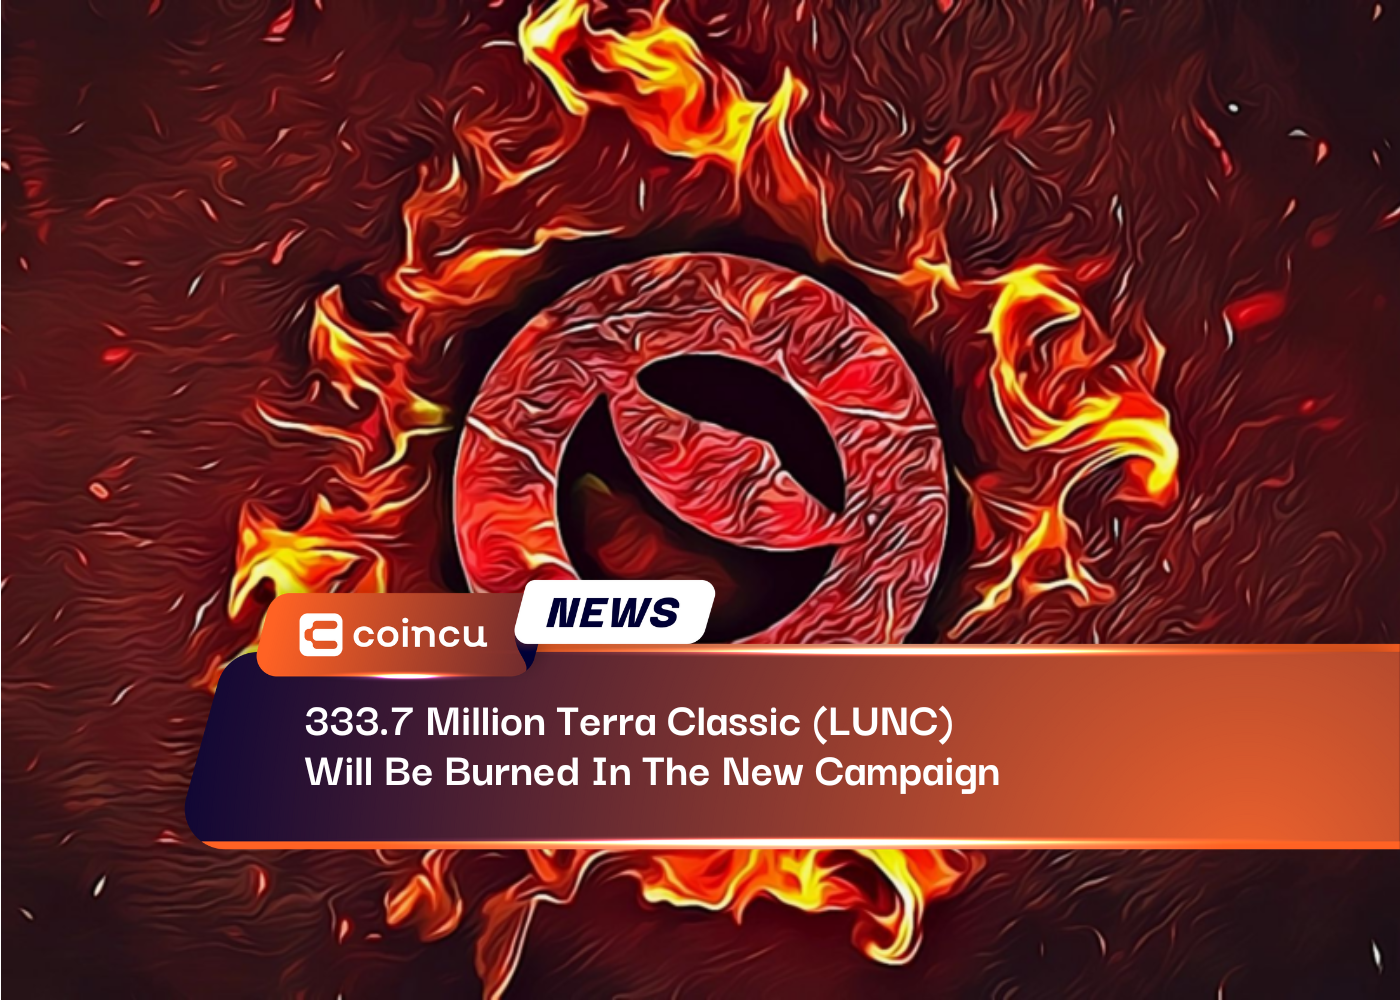 333.7 Million Terra Classic (LUNC) Will Be Burned In The New Campaign